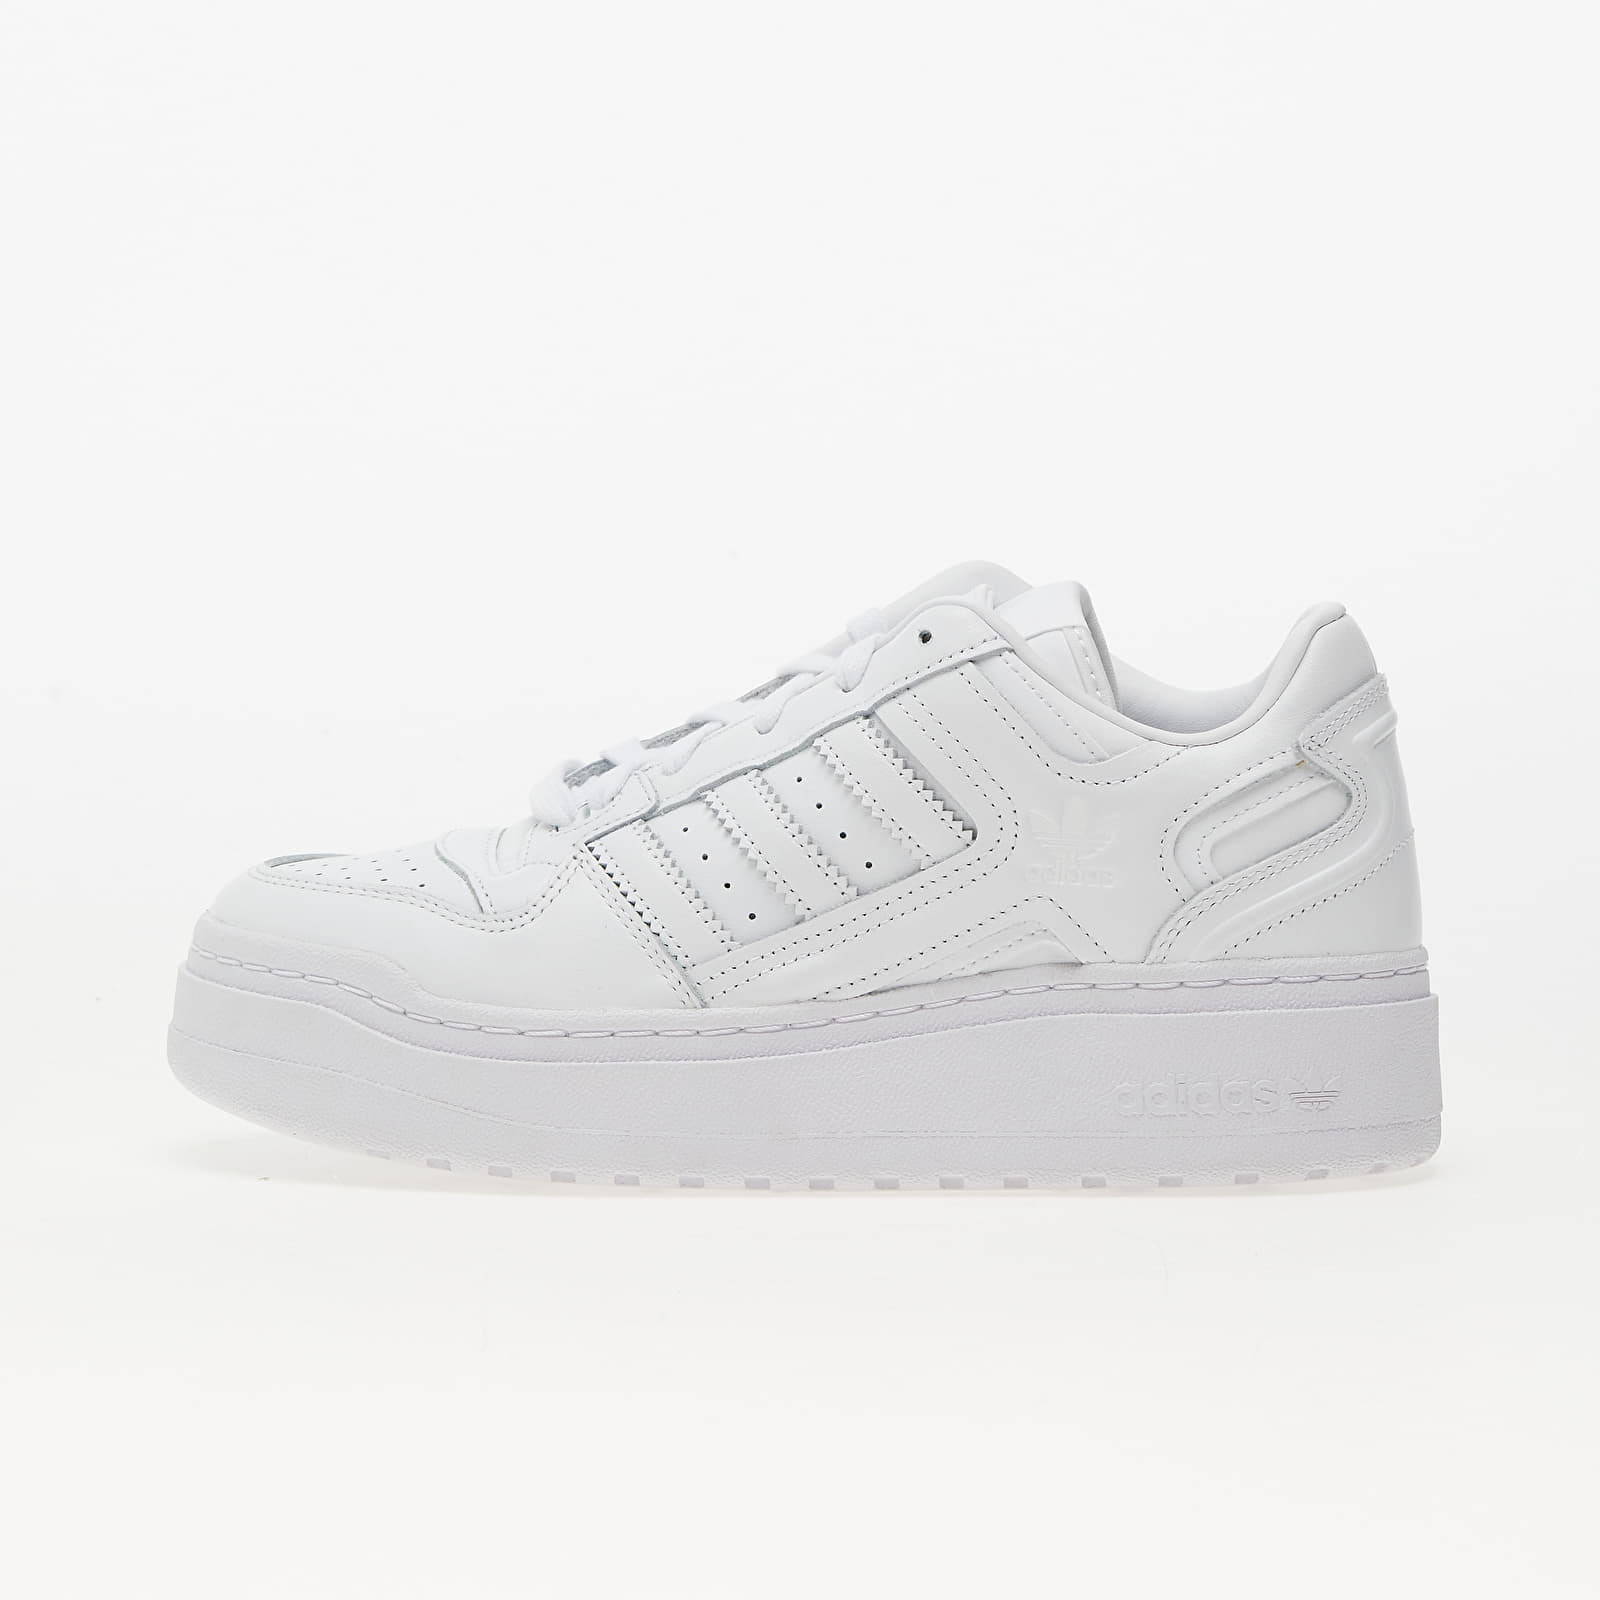 Buty damskie adidas Forum Xlg Ftw White/ Ftw White/ Crystal White